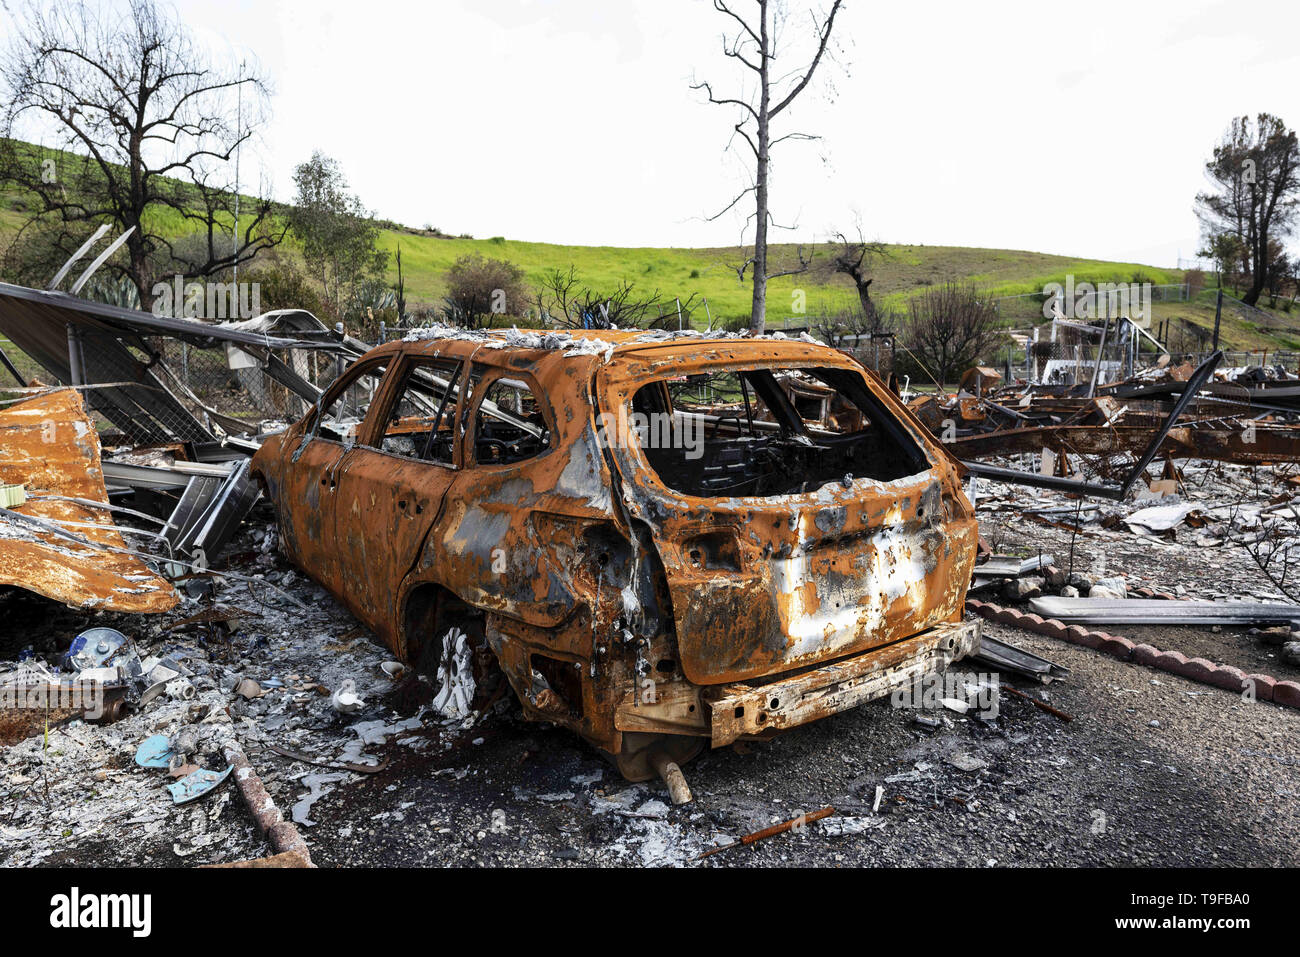 Agoura Hills, CA, USA. 11th Mar, 2019. A burned car is seen in the aftermath of the deadly Woolsey wid fire in Agoura Hills, California.Thousands of fire fighters battled the 2018 Woolsey brush fire in southern California as tens of thousands of people were under mandatory evacuation. 1500 destroyed - 341 damaged, structures were destroyed and damaged, 3 fire fighters were injured and 3 civilian fatalities encountered. The cause of the fire is still uncertain. Credit: Ronen Tivony/SOPA Images/ZUMA Wire/Alamy Live News Stock Photo